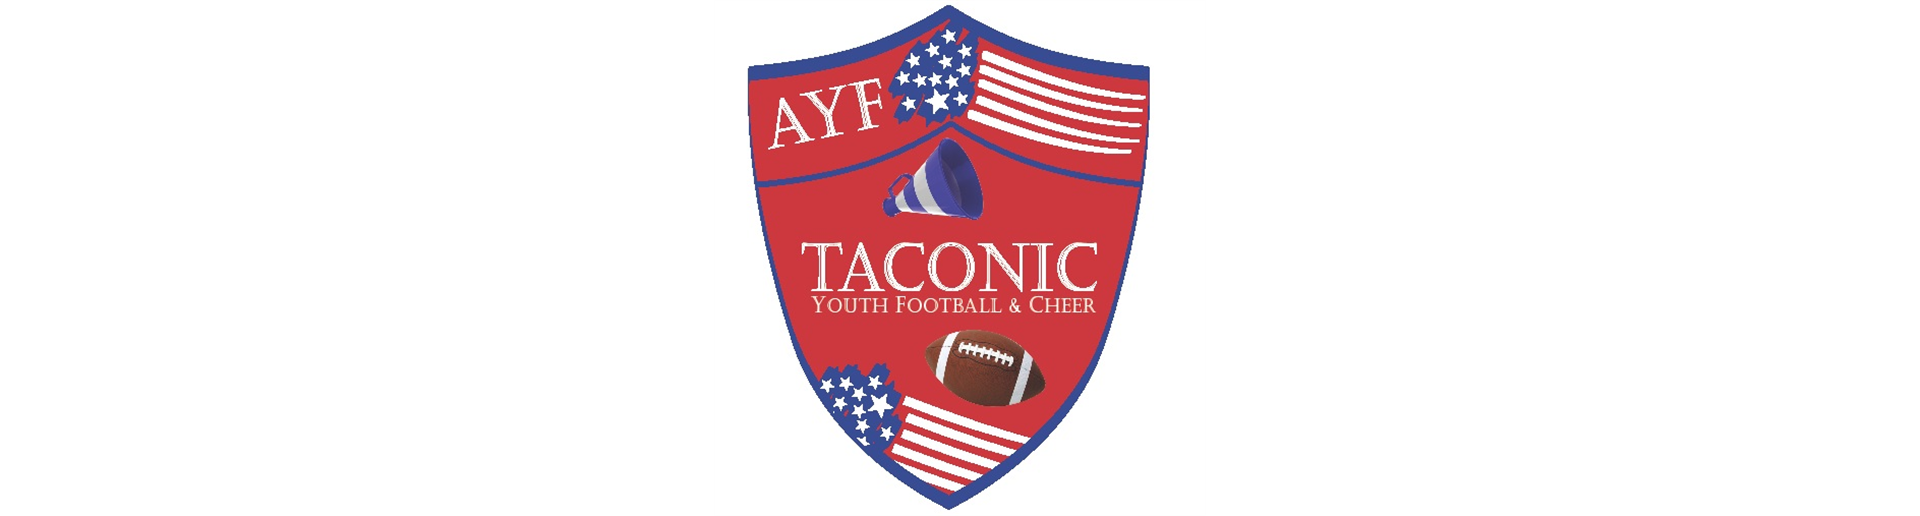 Welcome to the new home of the TYFC !